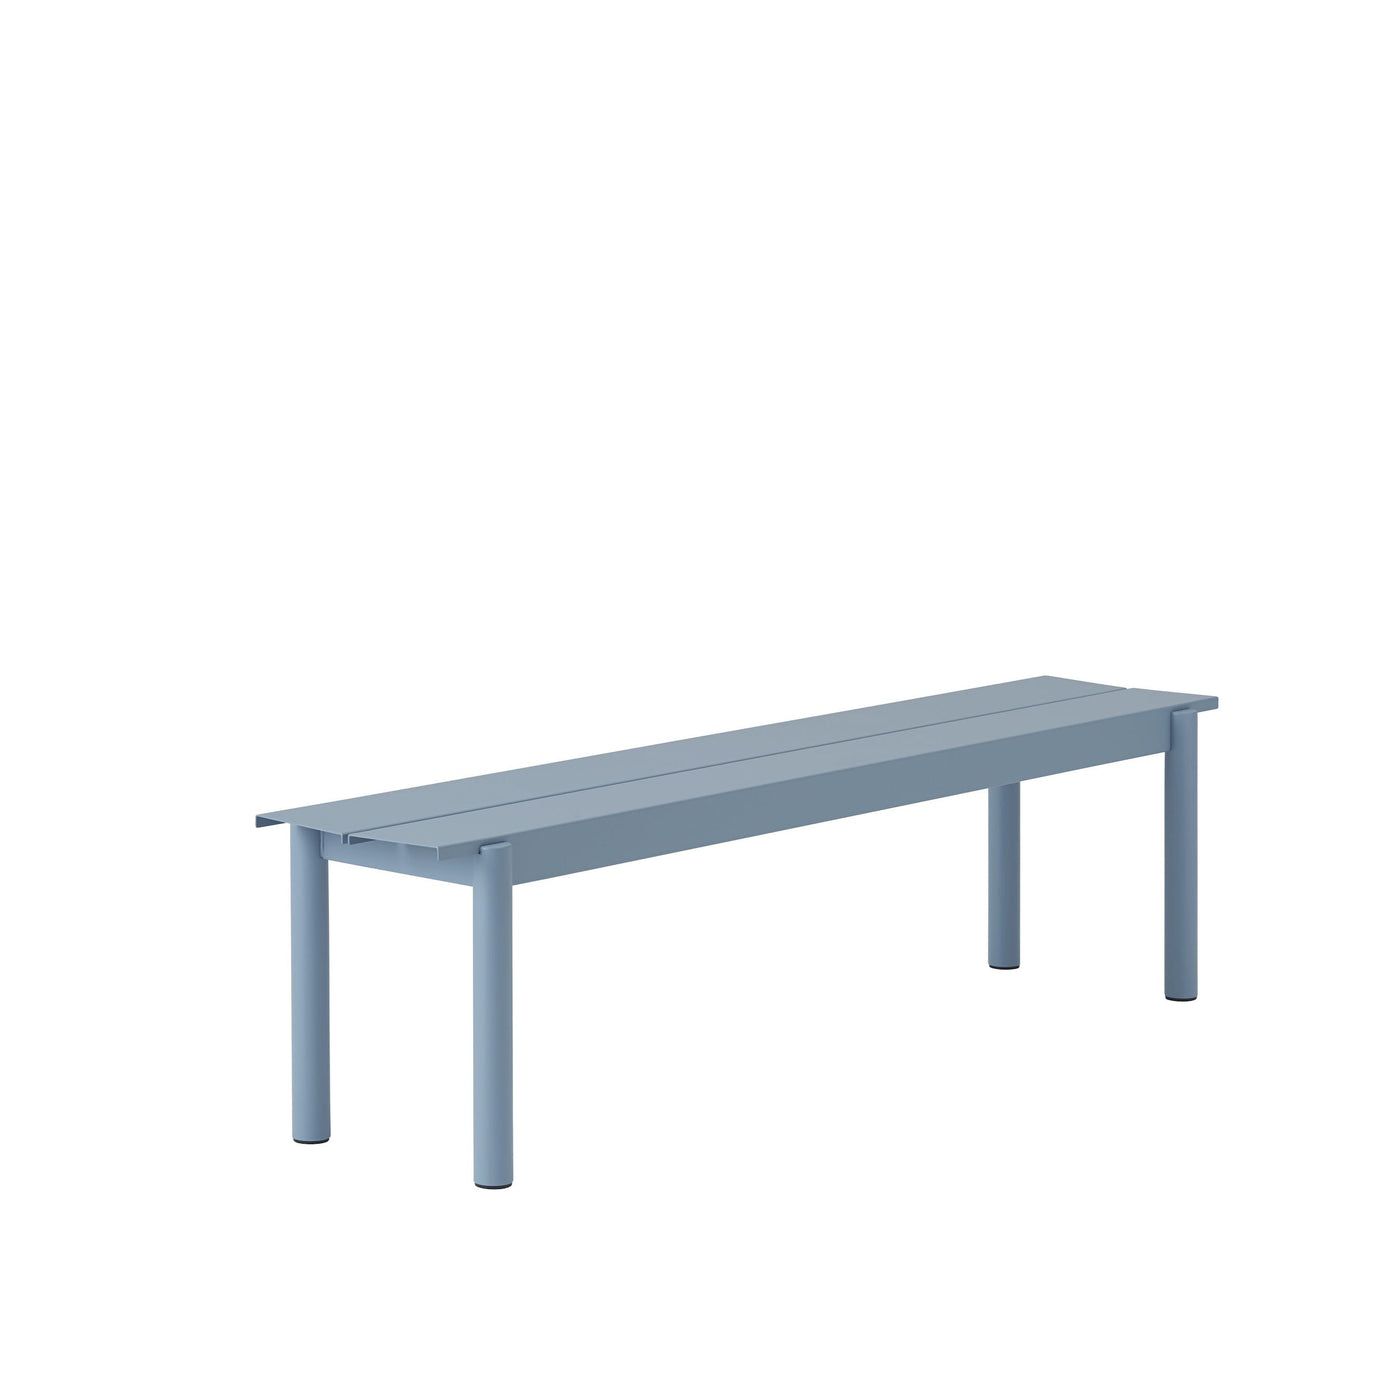 Muuto Linear Steel Bench, 34x170. Outdoor furniture by someday designs. #colour_pale-blue